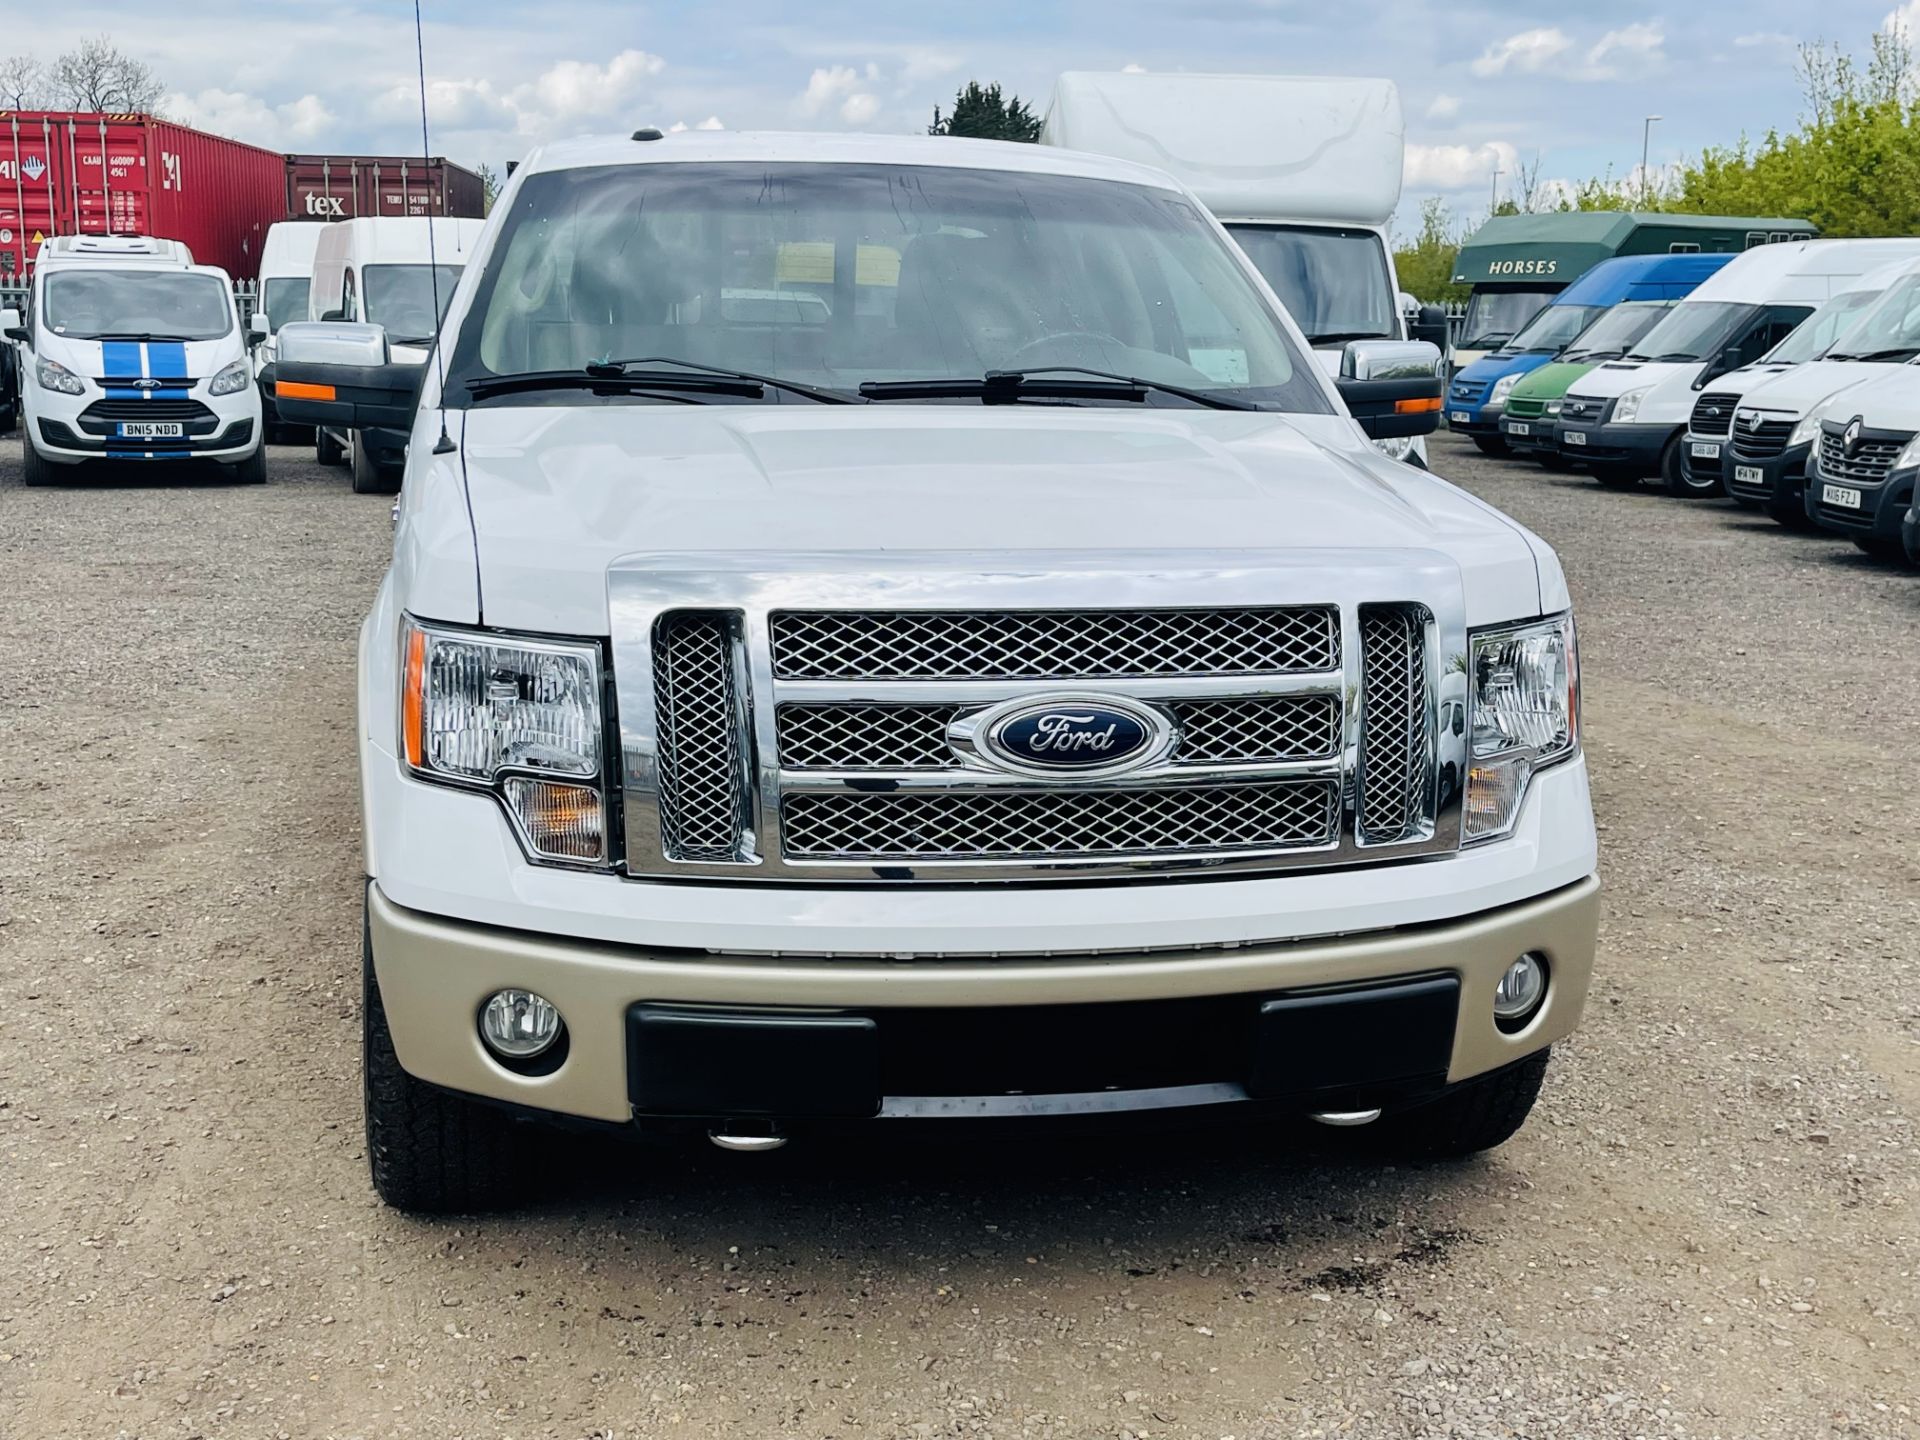 ** ON SALE ** Ford F-150 5.4L V8 Lariat Supercrew 4WD ' 2010 Year' A/C - Full Spec - ULEZ Compliant - Image 3 of 29